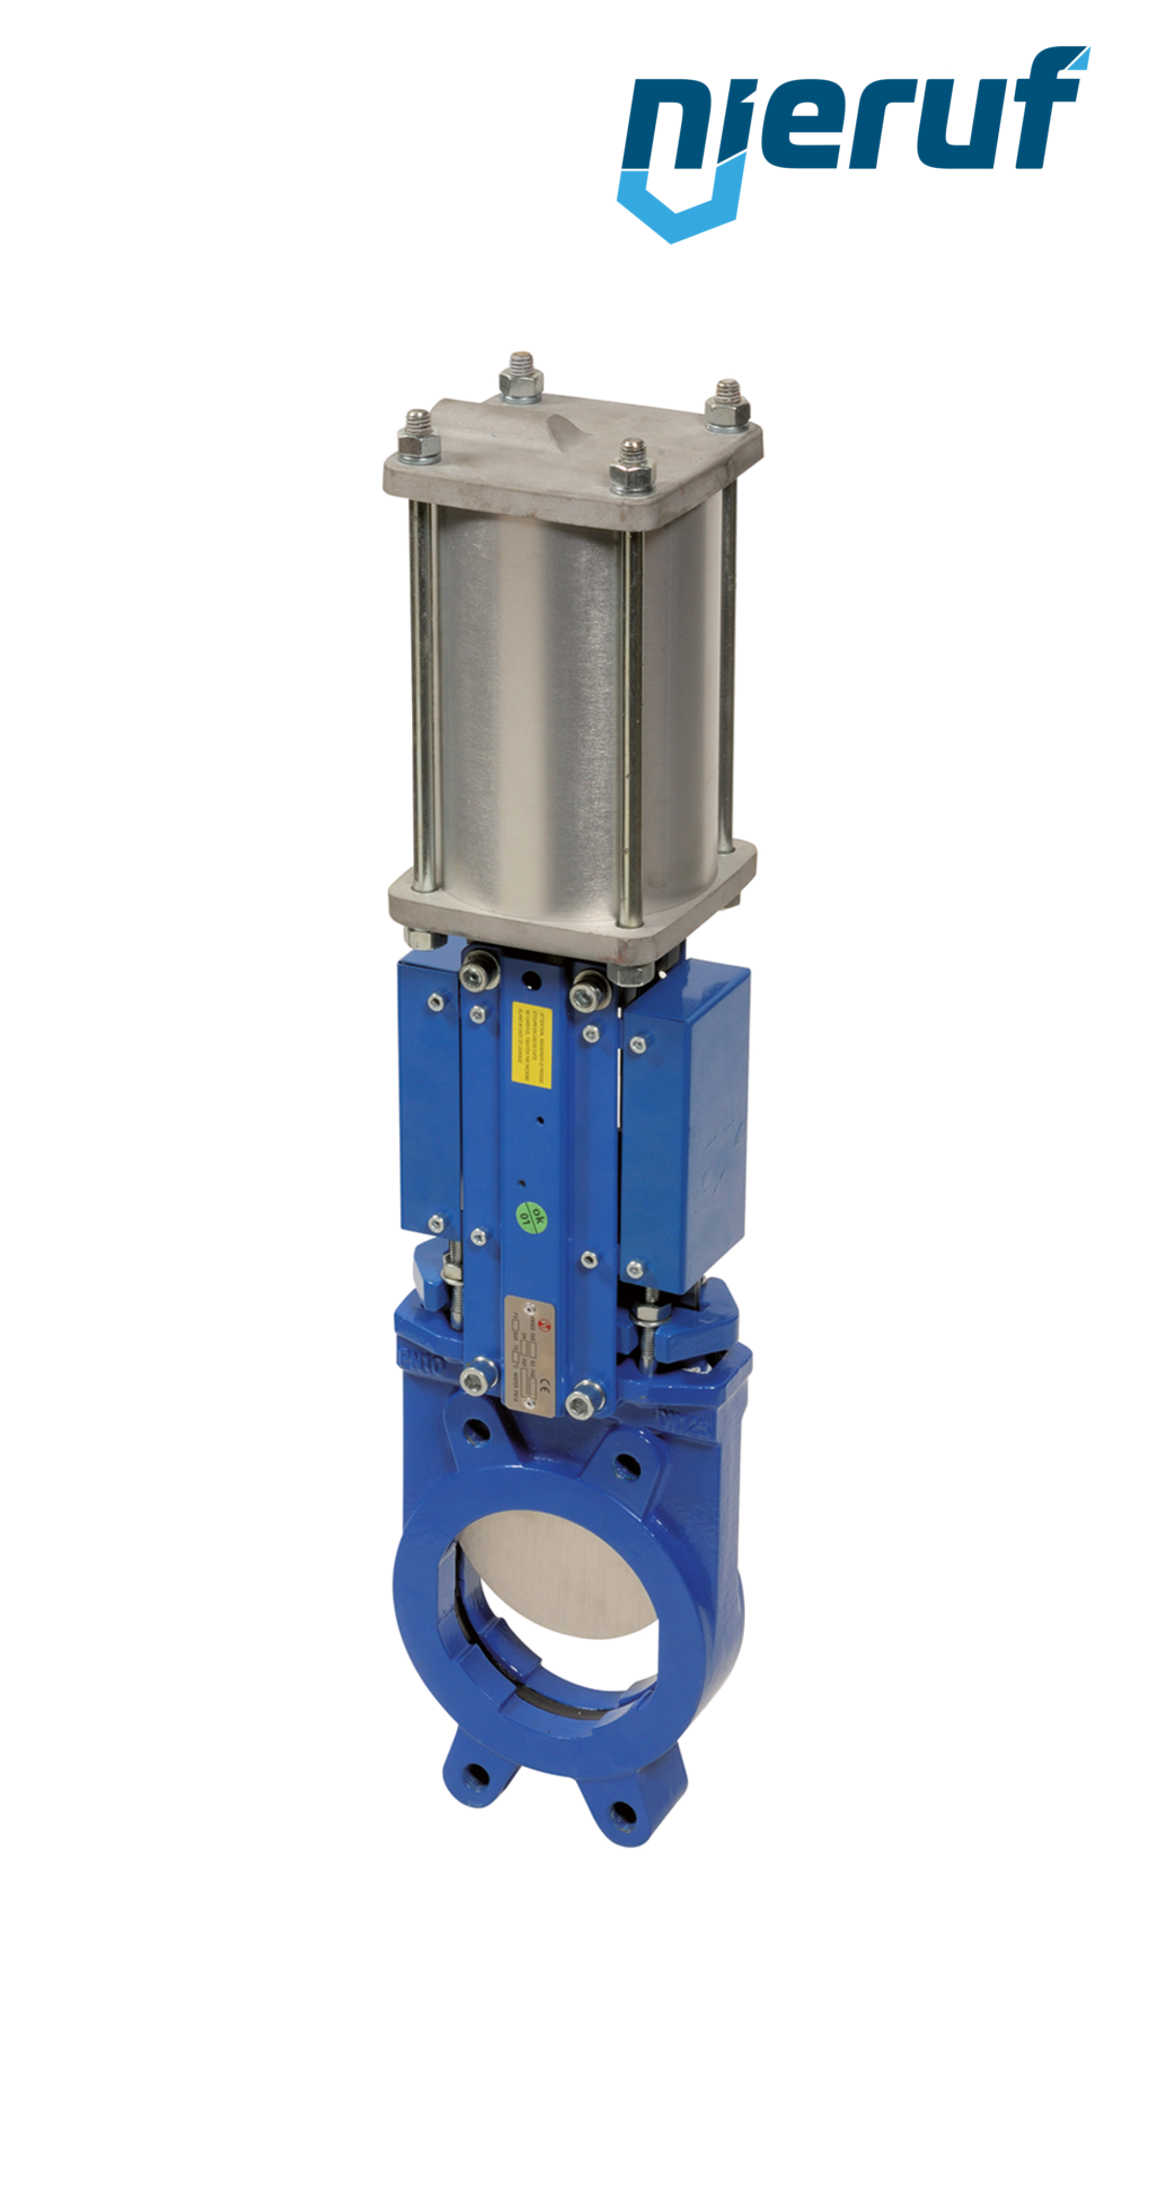 Knife gate valve DN 250 SR01 EPDM pneumatic actuation double acting